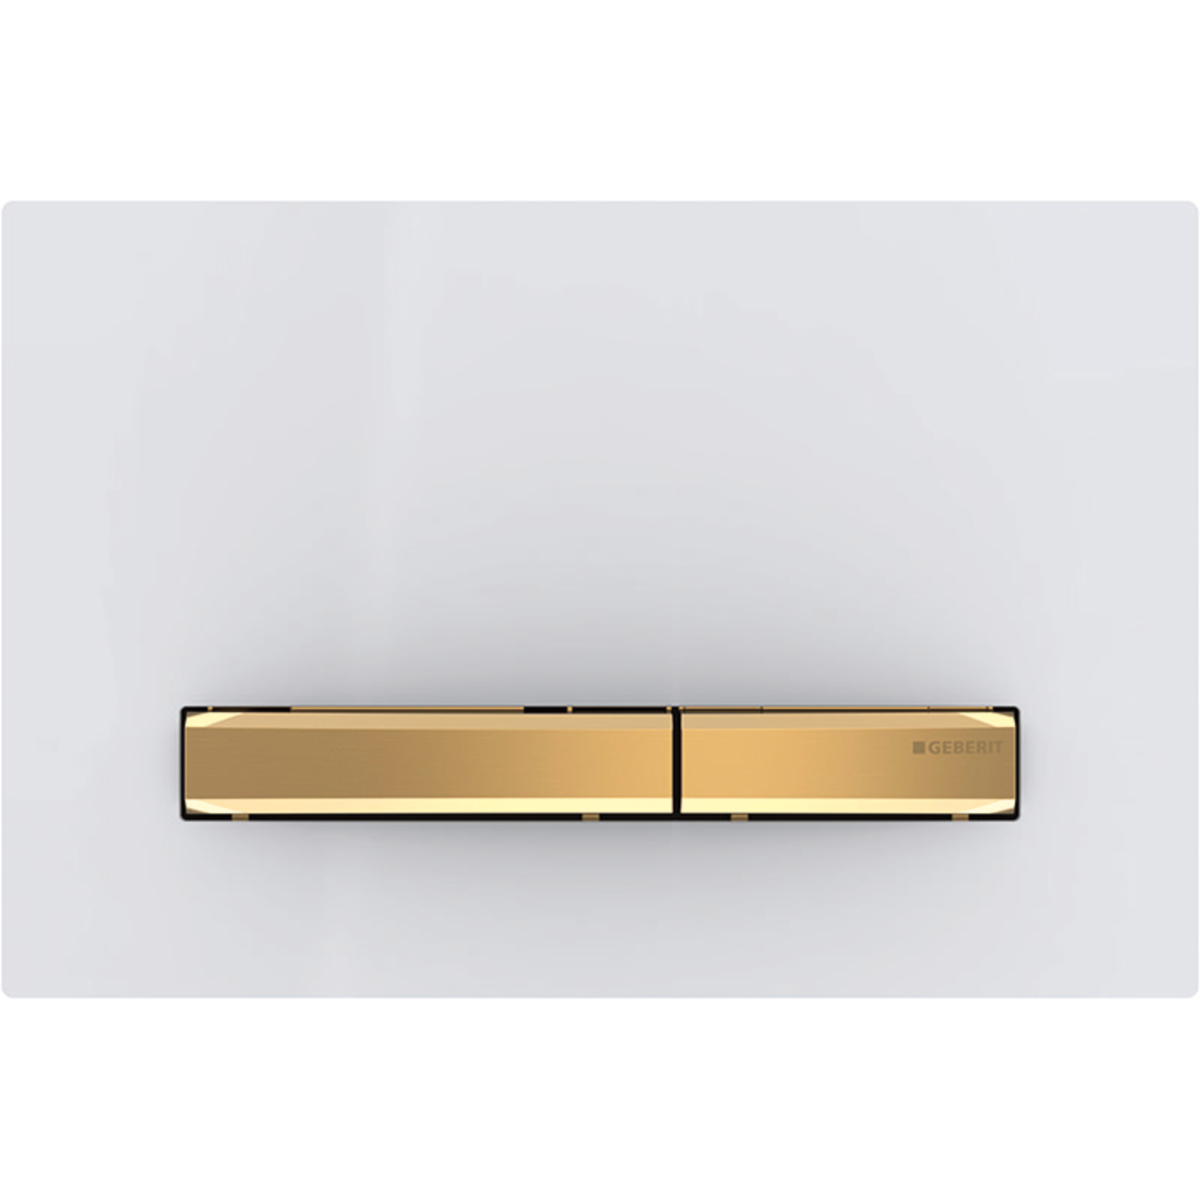 Geberit 115.672.11.2 Actuator Plate Sigma50 for Dual Flush, Metal Colour Brass - Base Plate and Buttons: Brass/Cover Plate: White